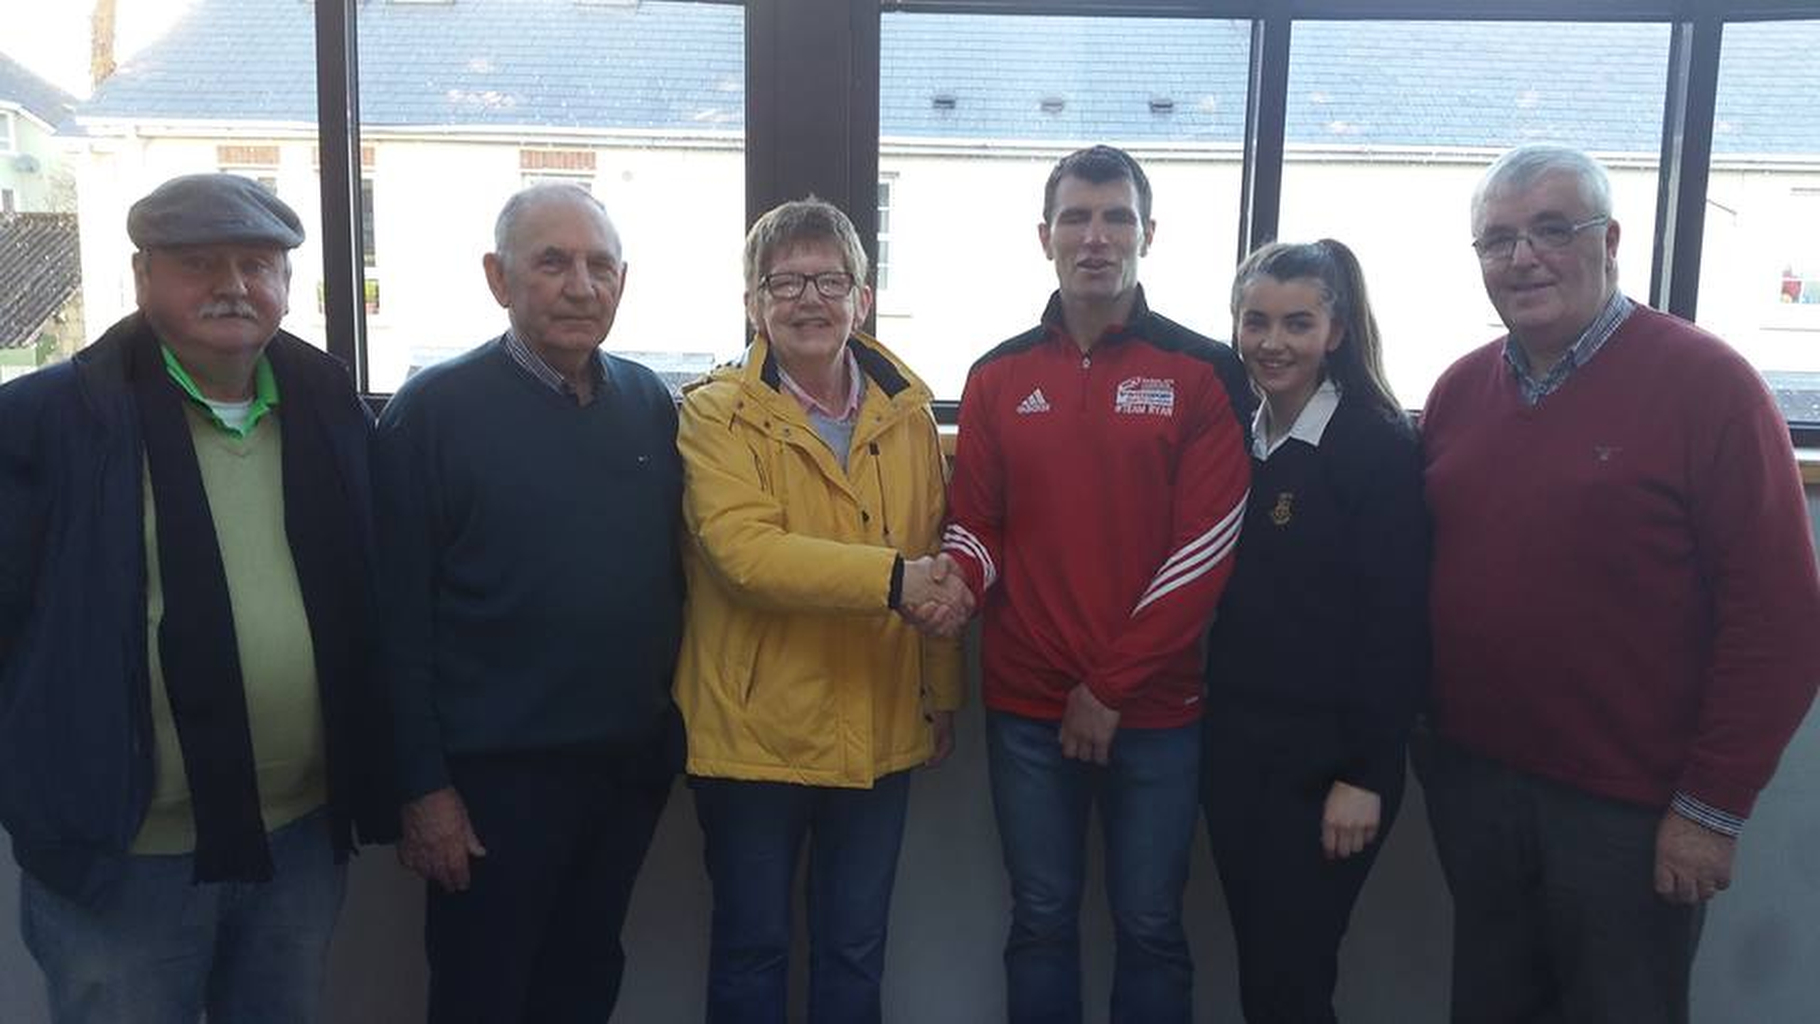 Ita Daly who was the lucky winner in the Letterkenny Credit Union Draw. pictured as she is congratulated by Danny Ryan who made the presentation pictured with members of the Letterkenny Credit Union board.